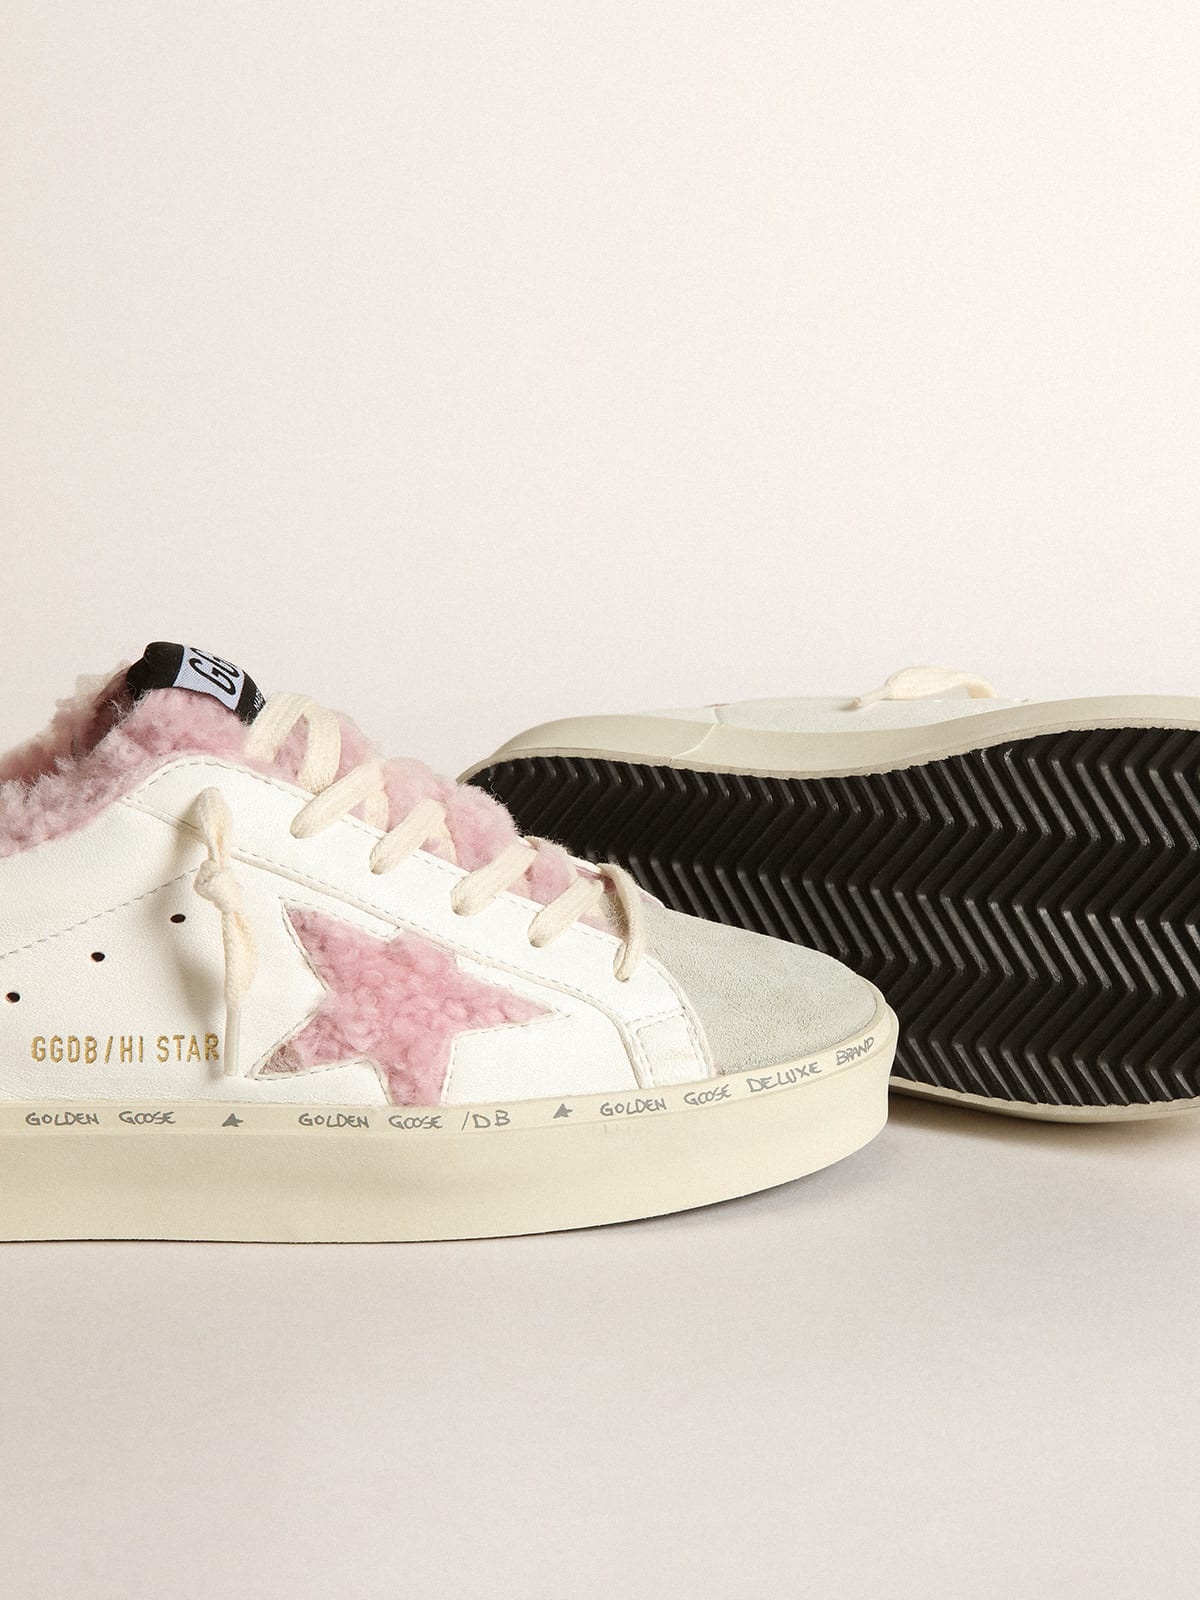 Hi Star in white nappa with pink shearling star and lining - 3